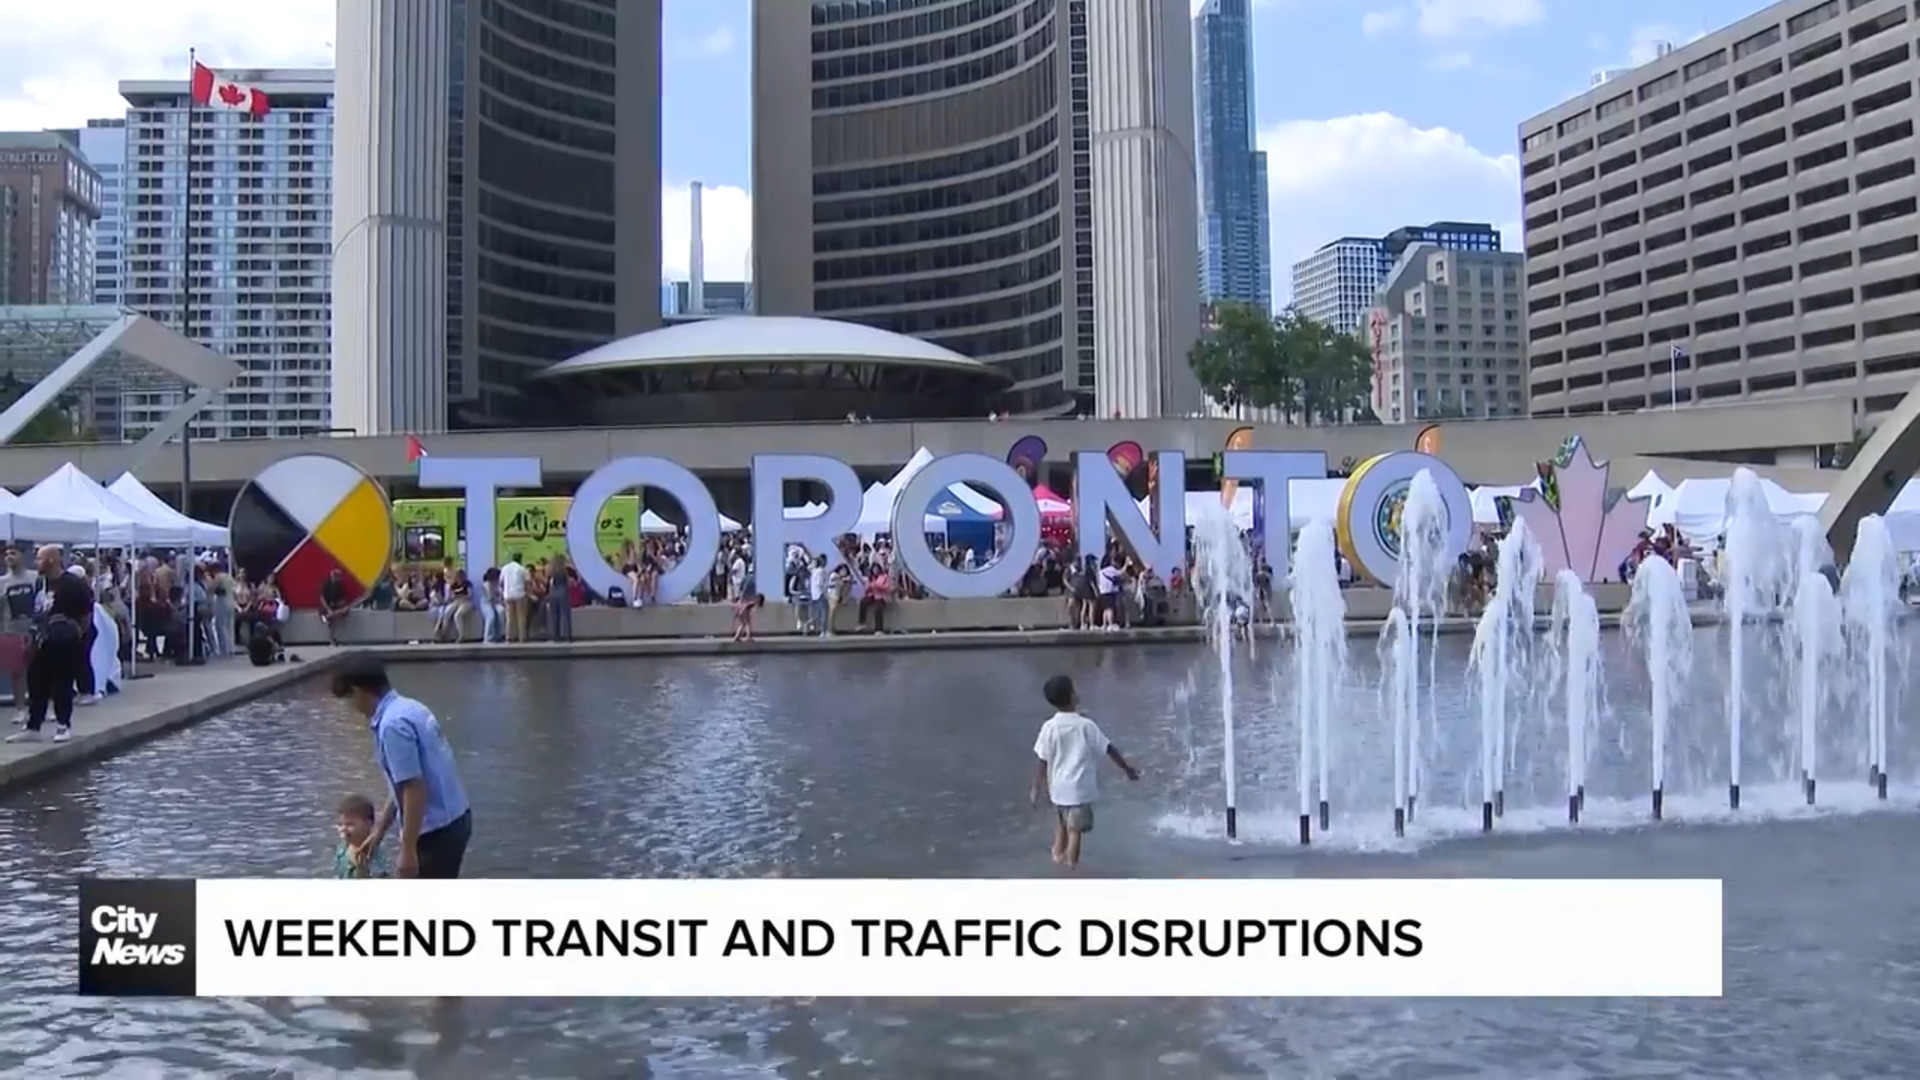 Jam-packed Toronto weekend filled with transit and traffic disruptions